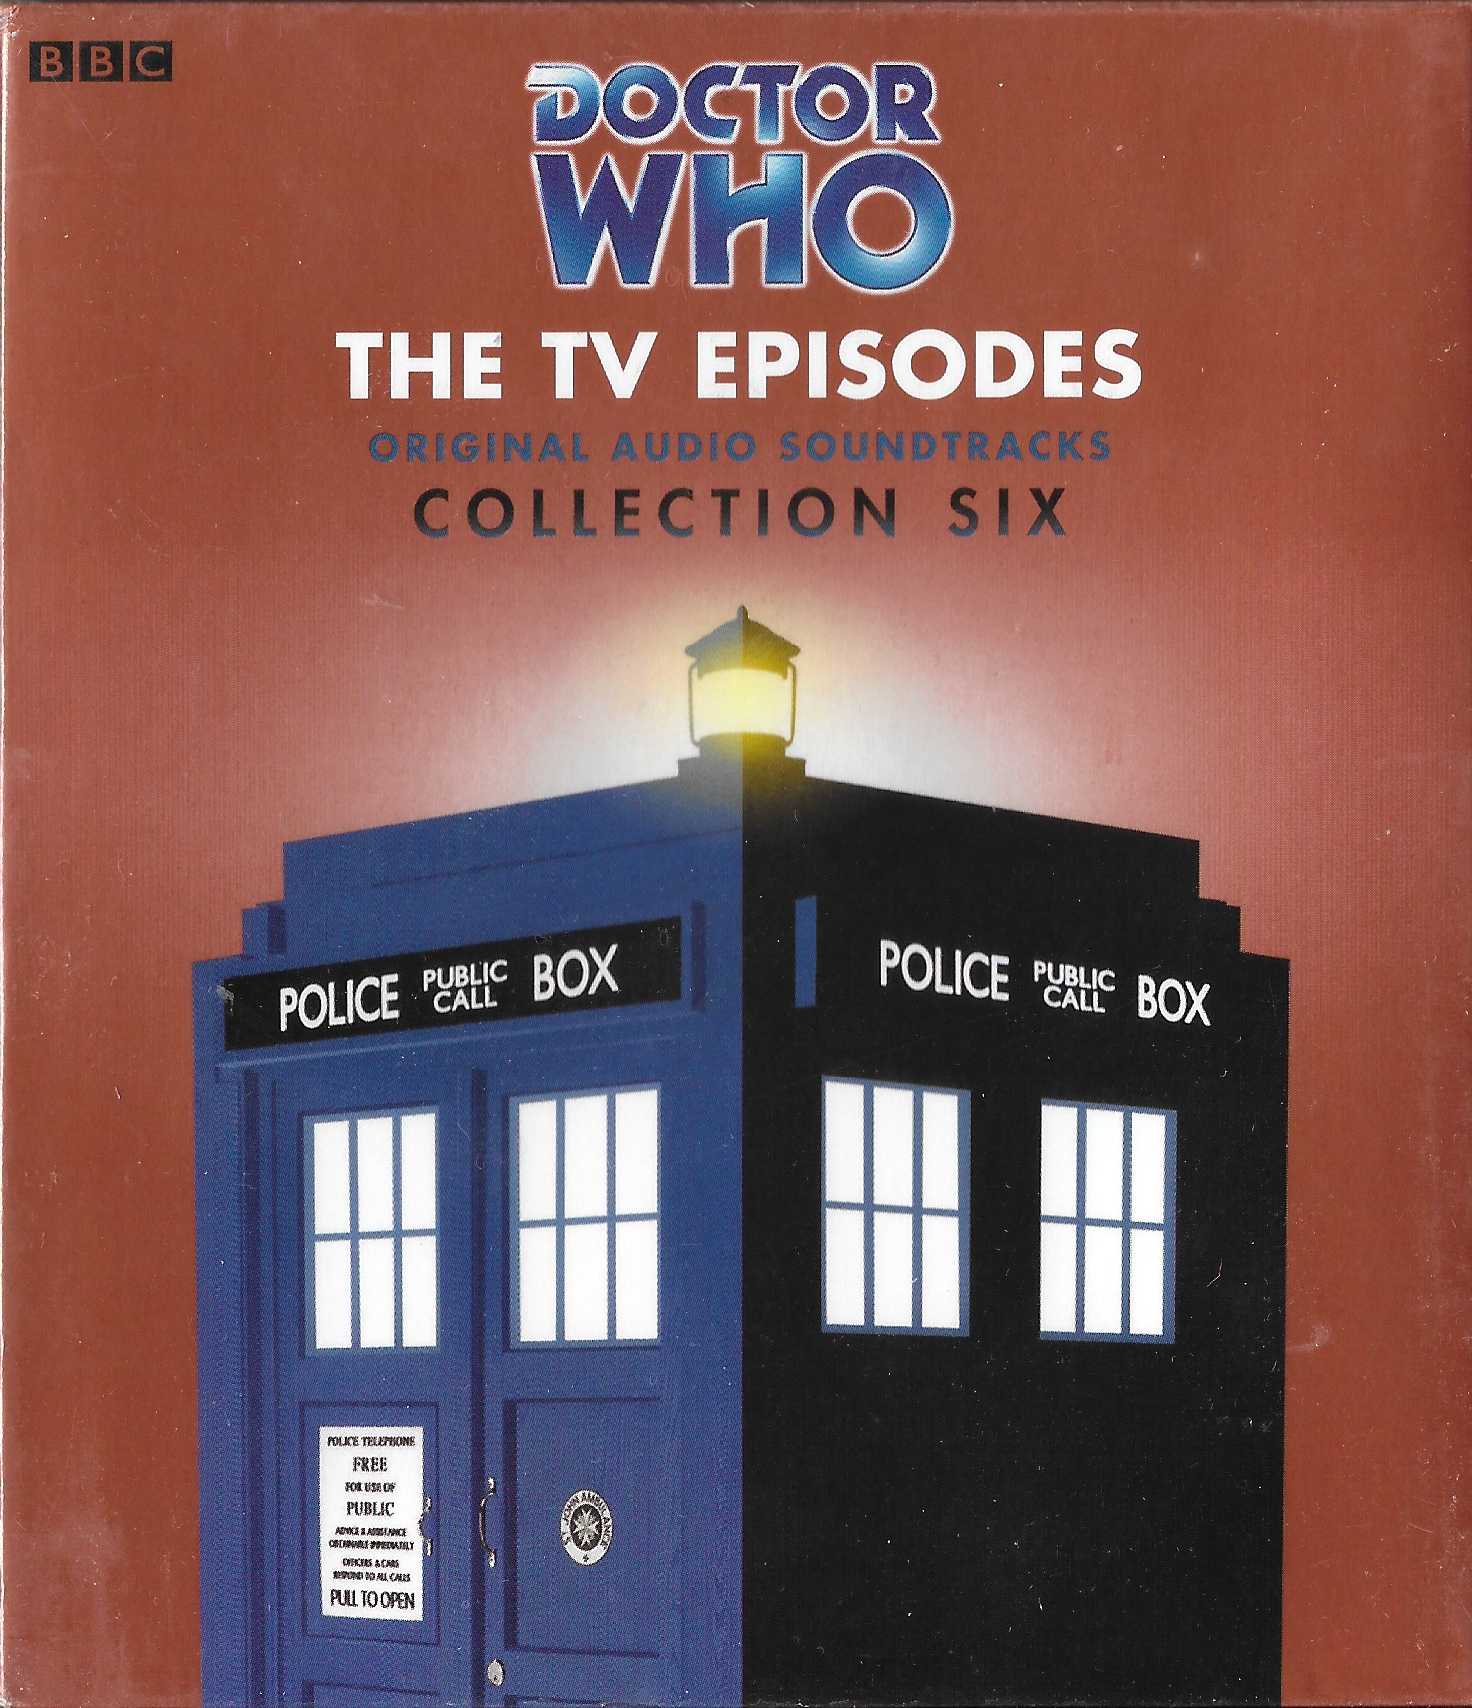 Picture of Doctor Who - The lost TV episodes - Collection six by artist Various from the BBC cds - Records and Tapes library